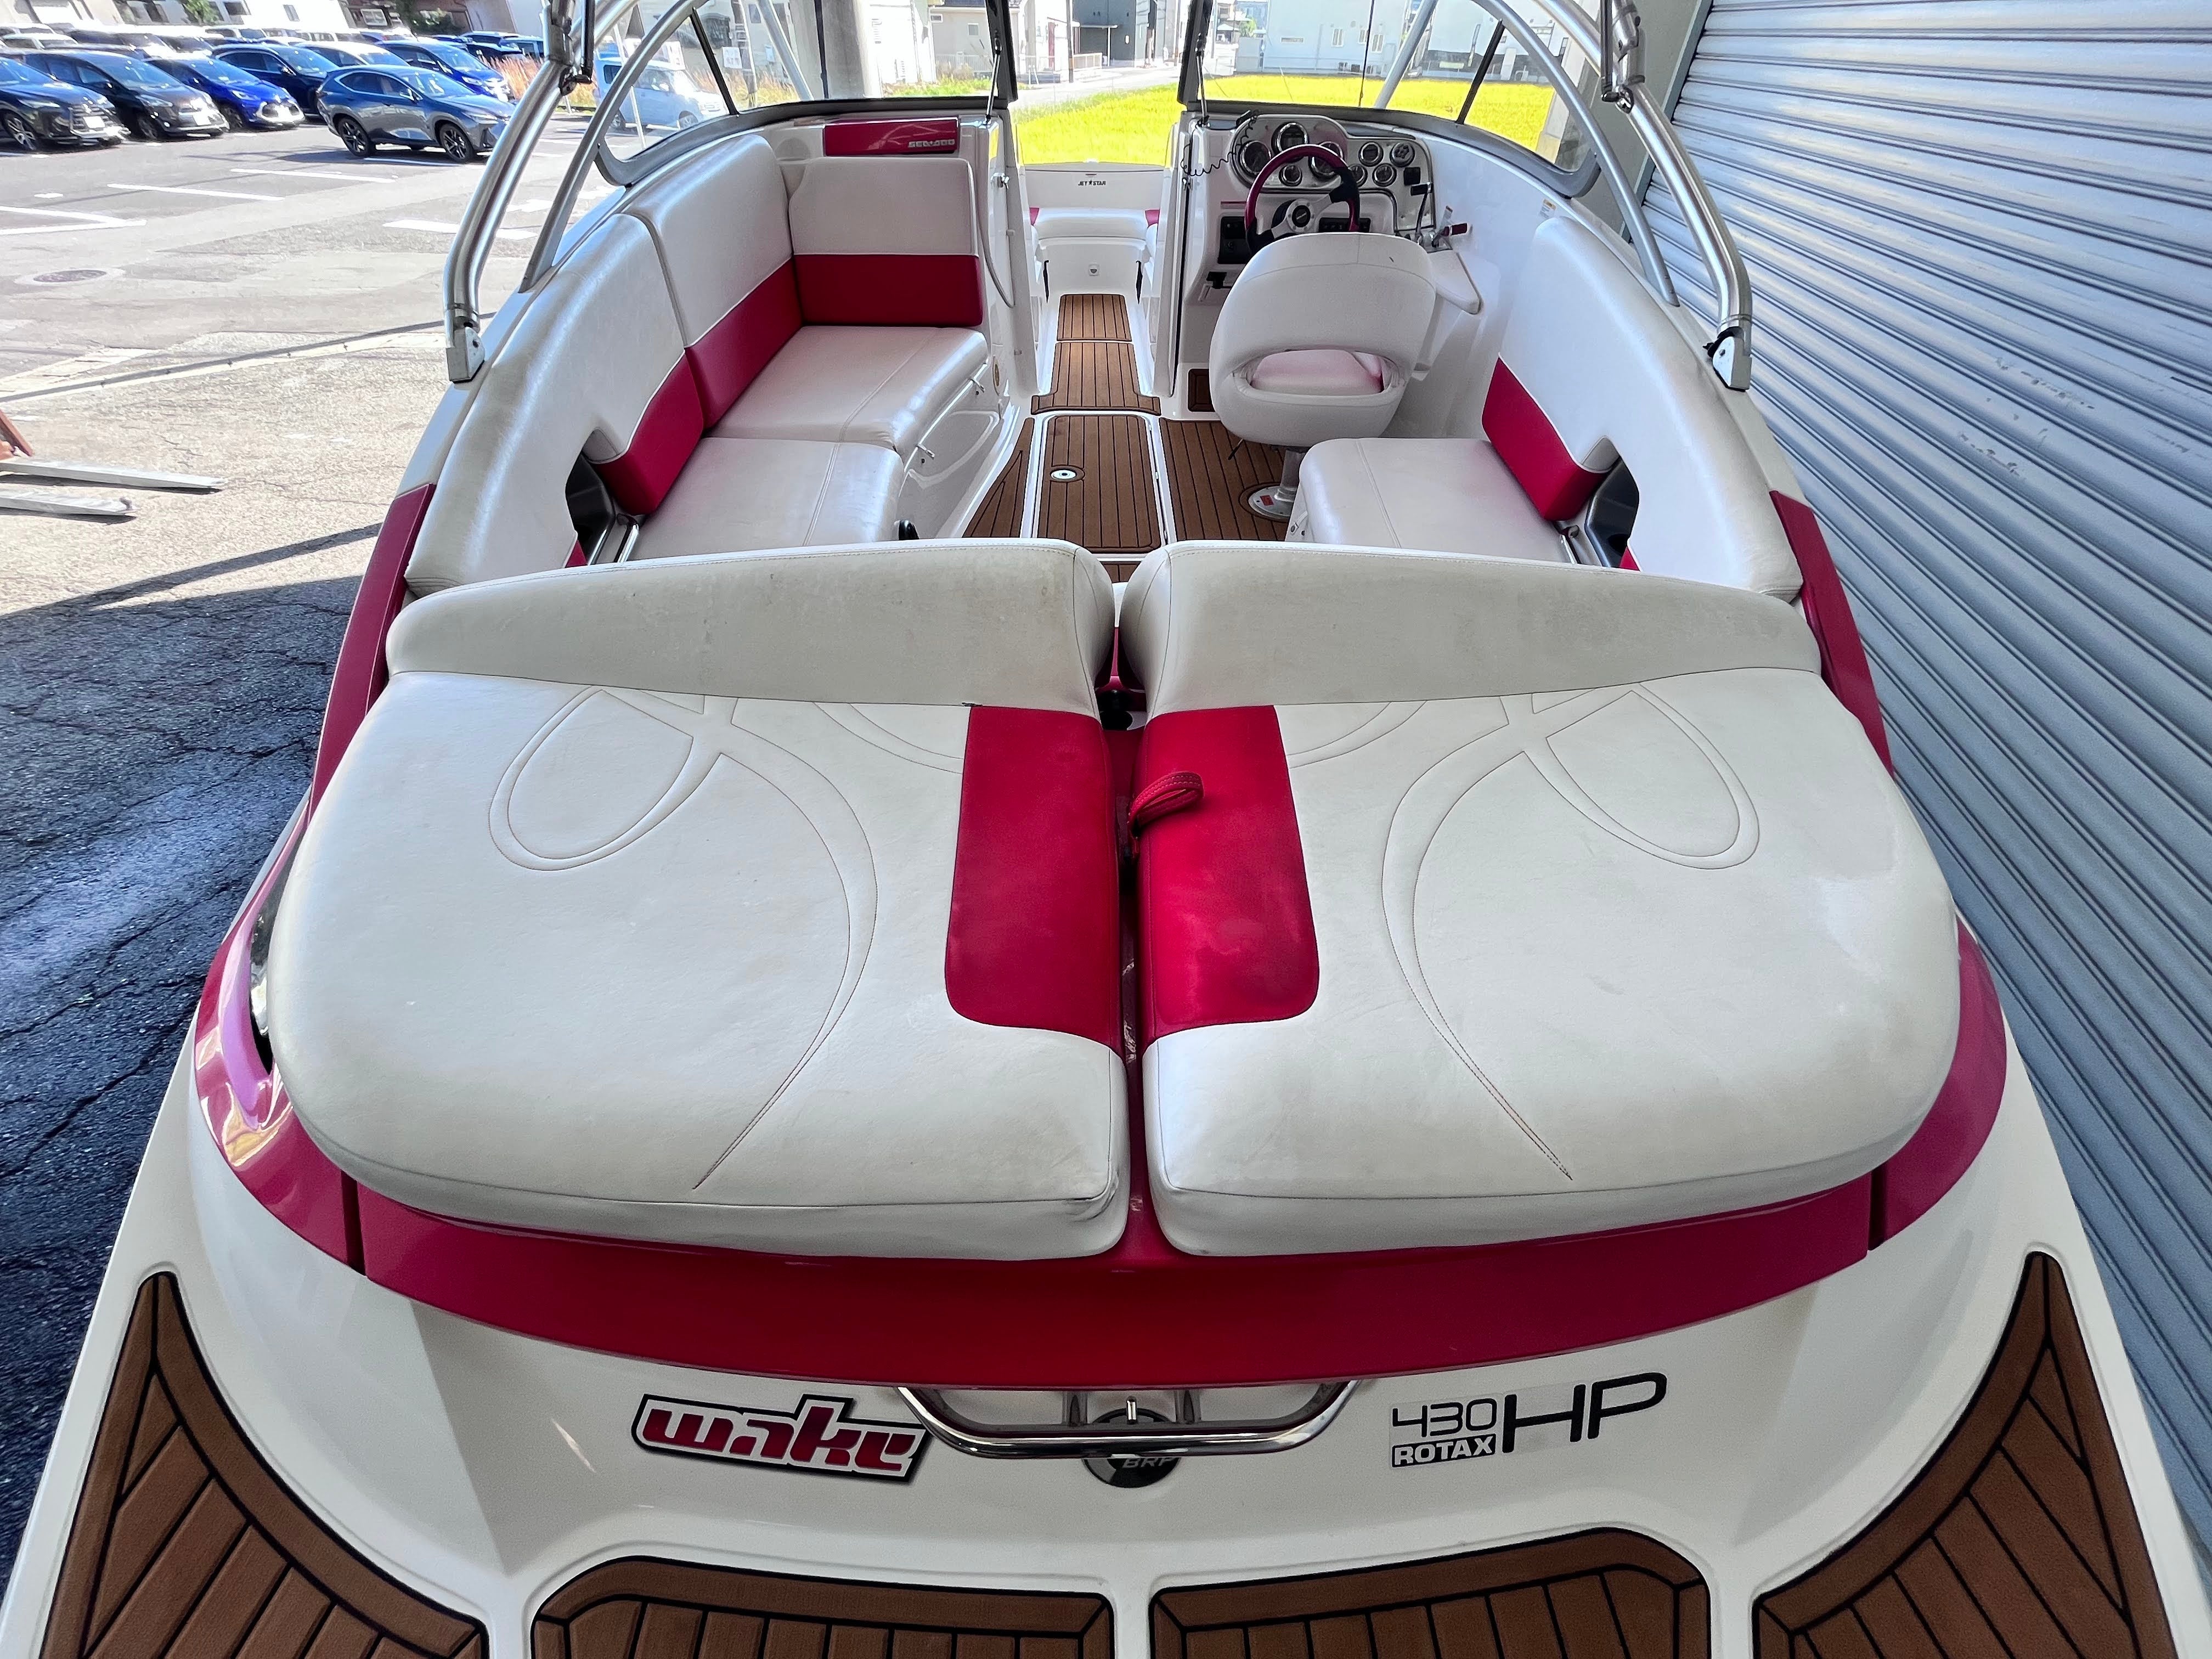 230WAKE '08 Used [Good condition]